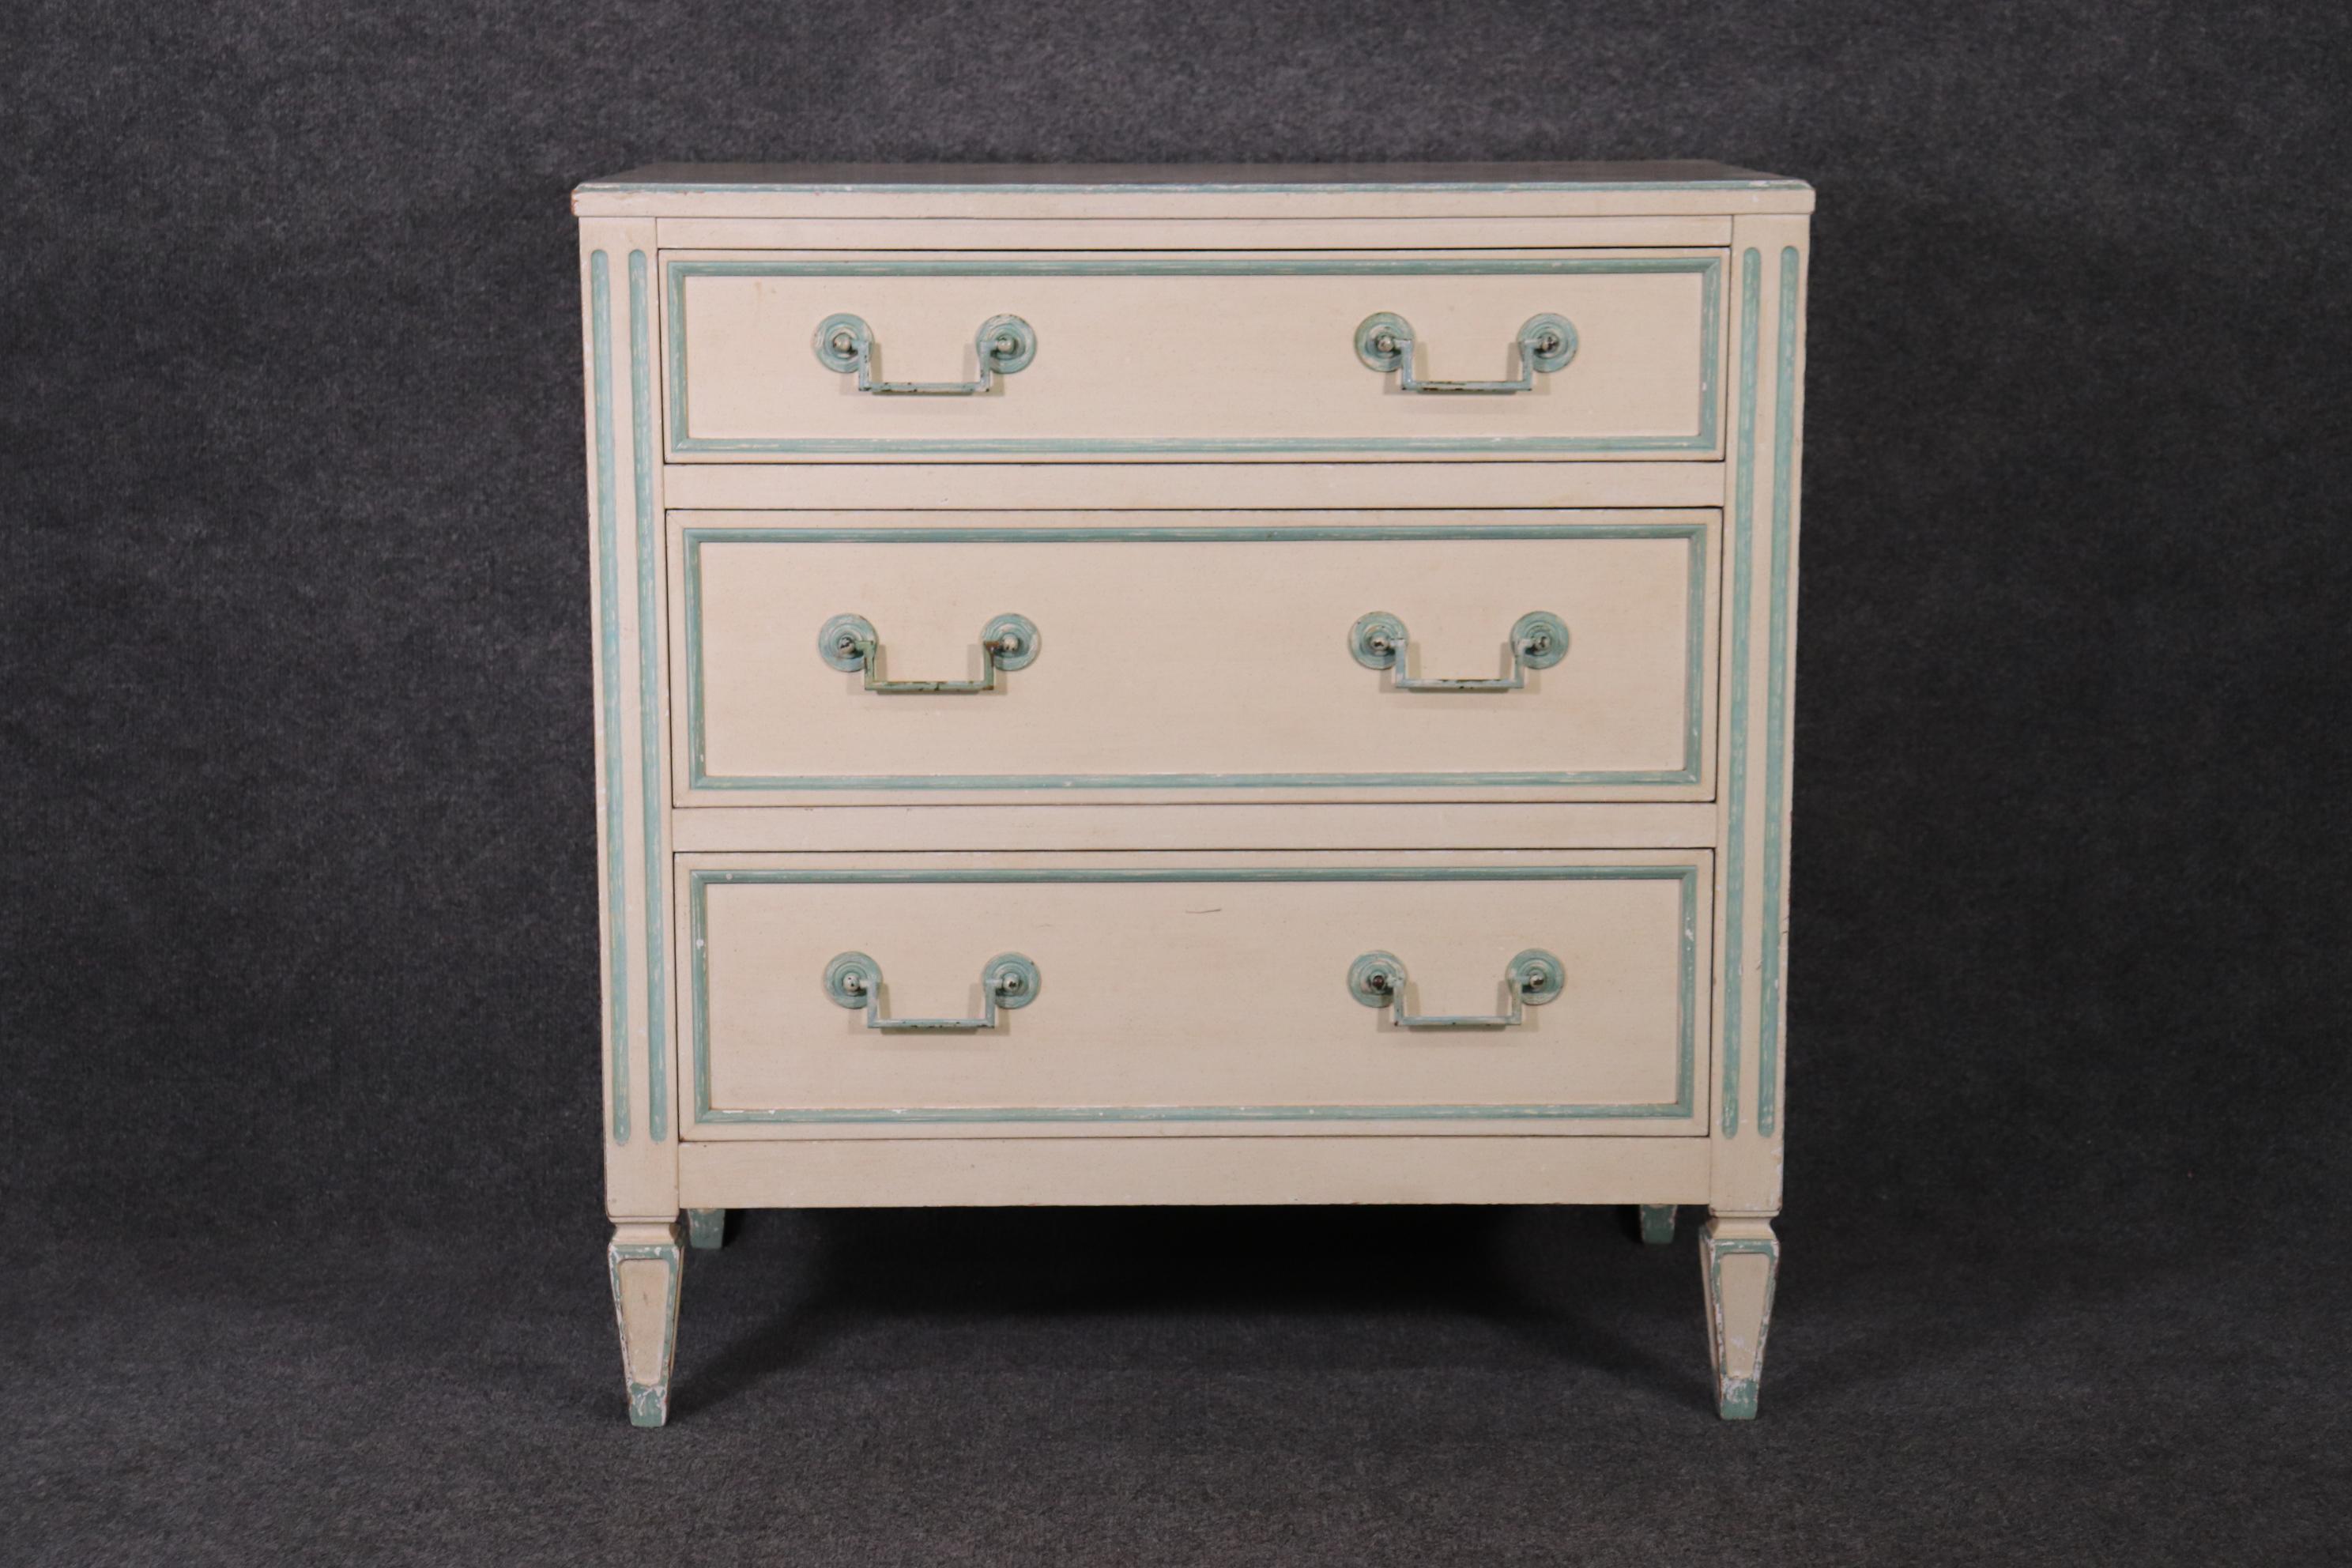 Dimensions- H: 31 3/4in W: 30 1/4in D: 18 1/2in
This distressed Louis XVI Directoire style paint decorated chest of drawers by Bodart is Made from High quality wood and done in a beautiful swedish Finish. The hardware is made of high quality brass